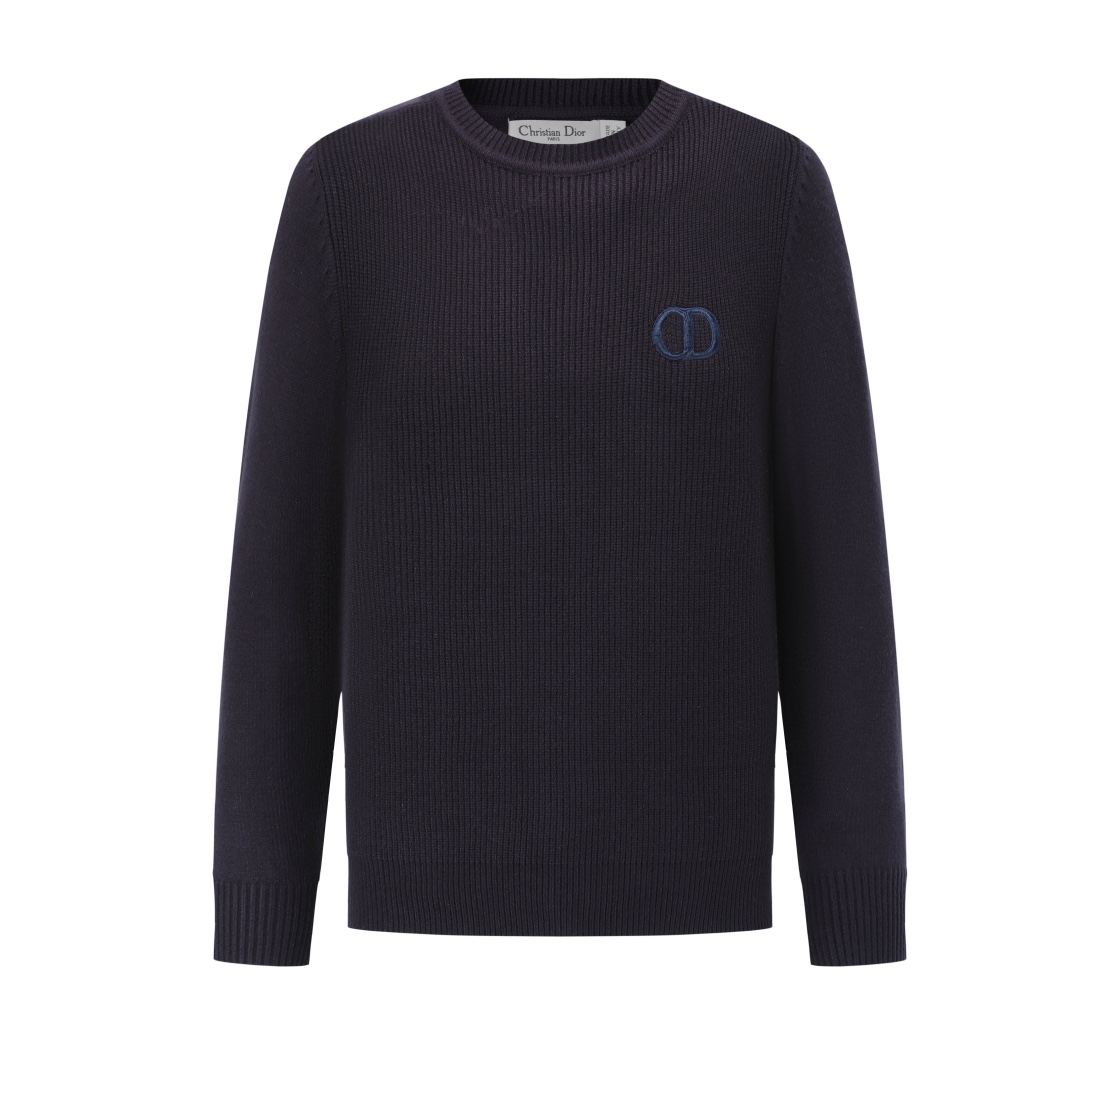 Dior Clothing Sweatshirts Best Designer Replica
 Embroidery Unisex Cotton Knitting Wool Fall Collection Fashion Long Sleeve